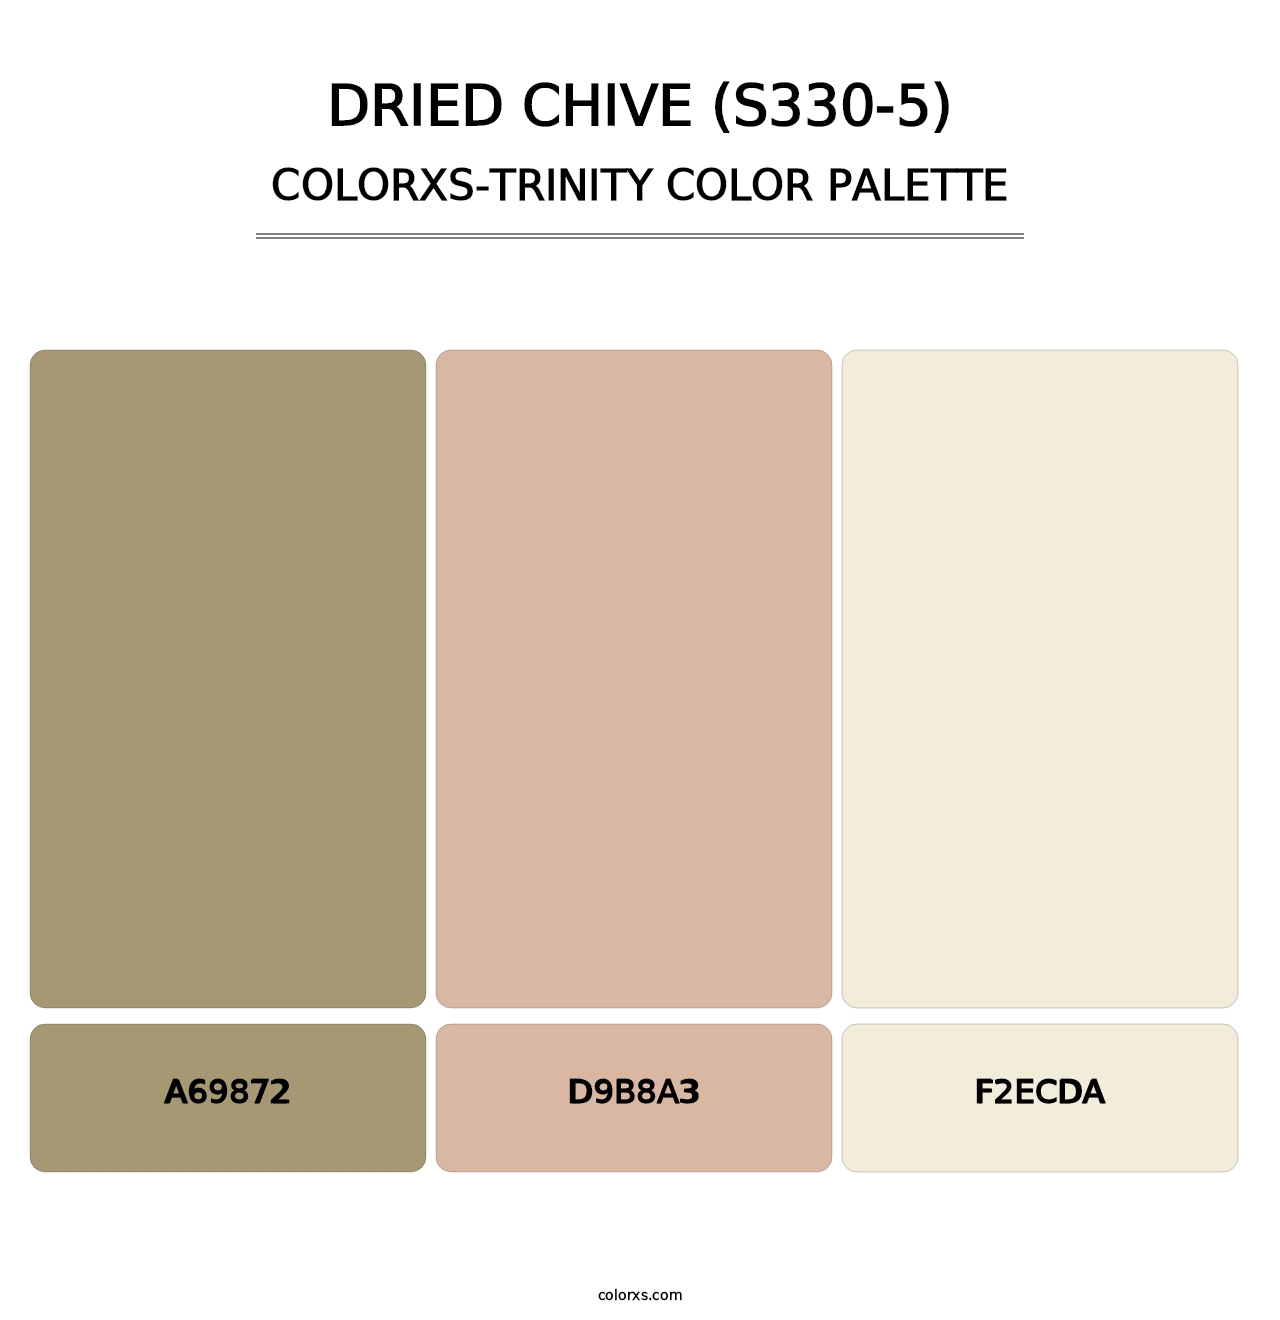 Dried Chive (S330-5) - Colorxs Trinity Palette